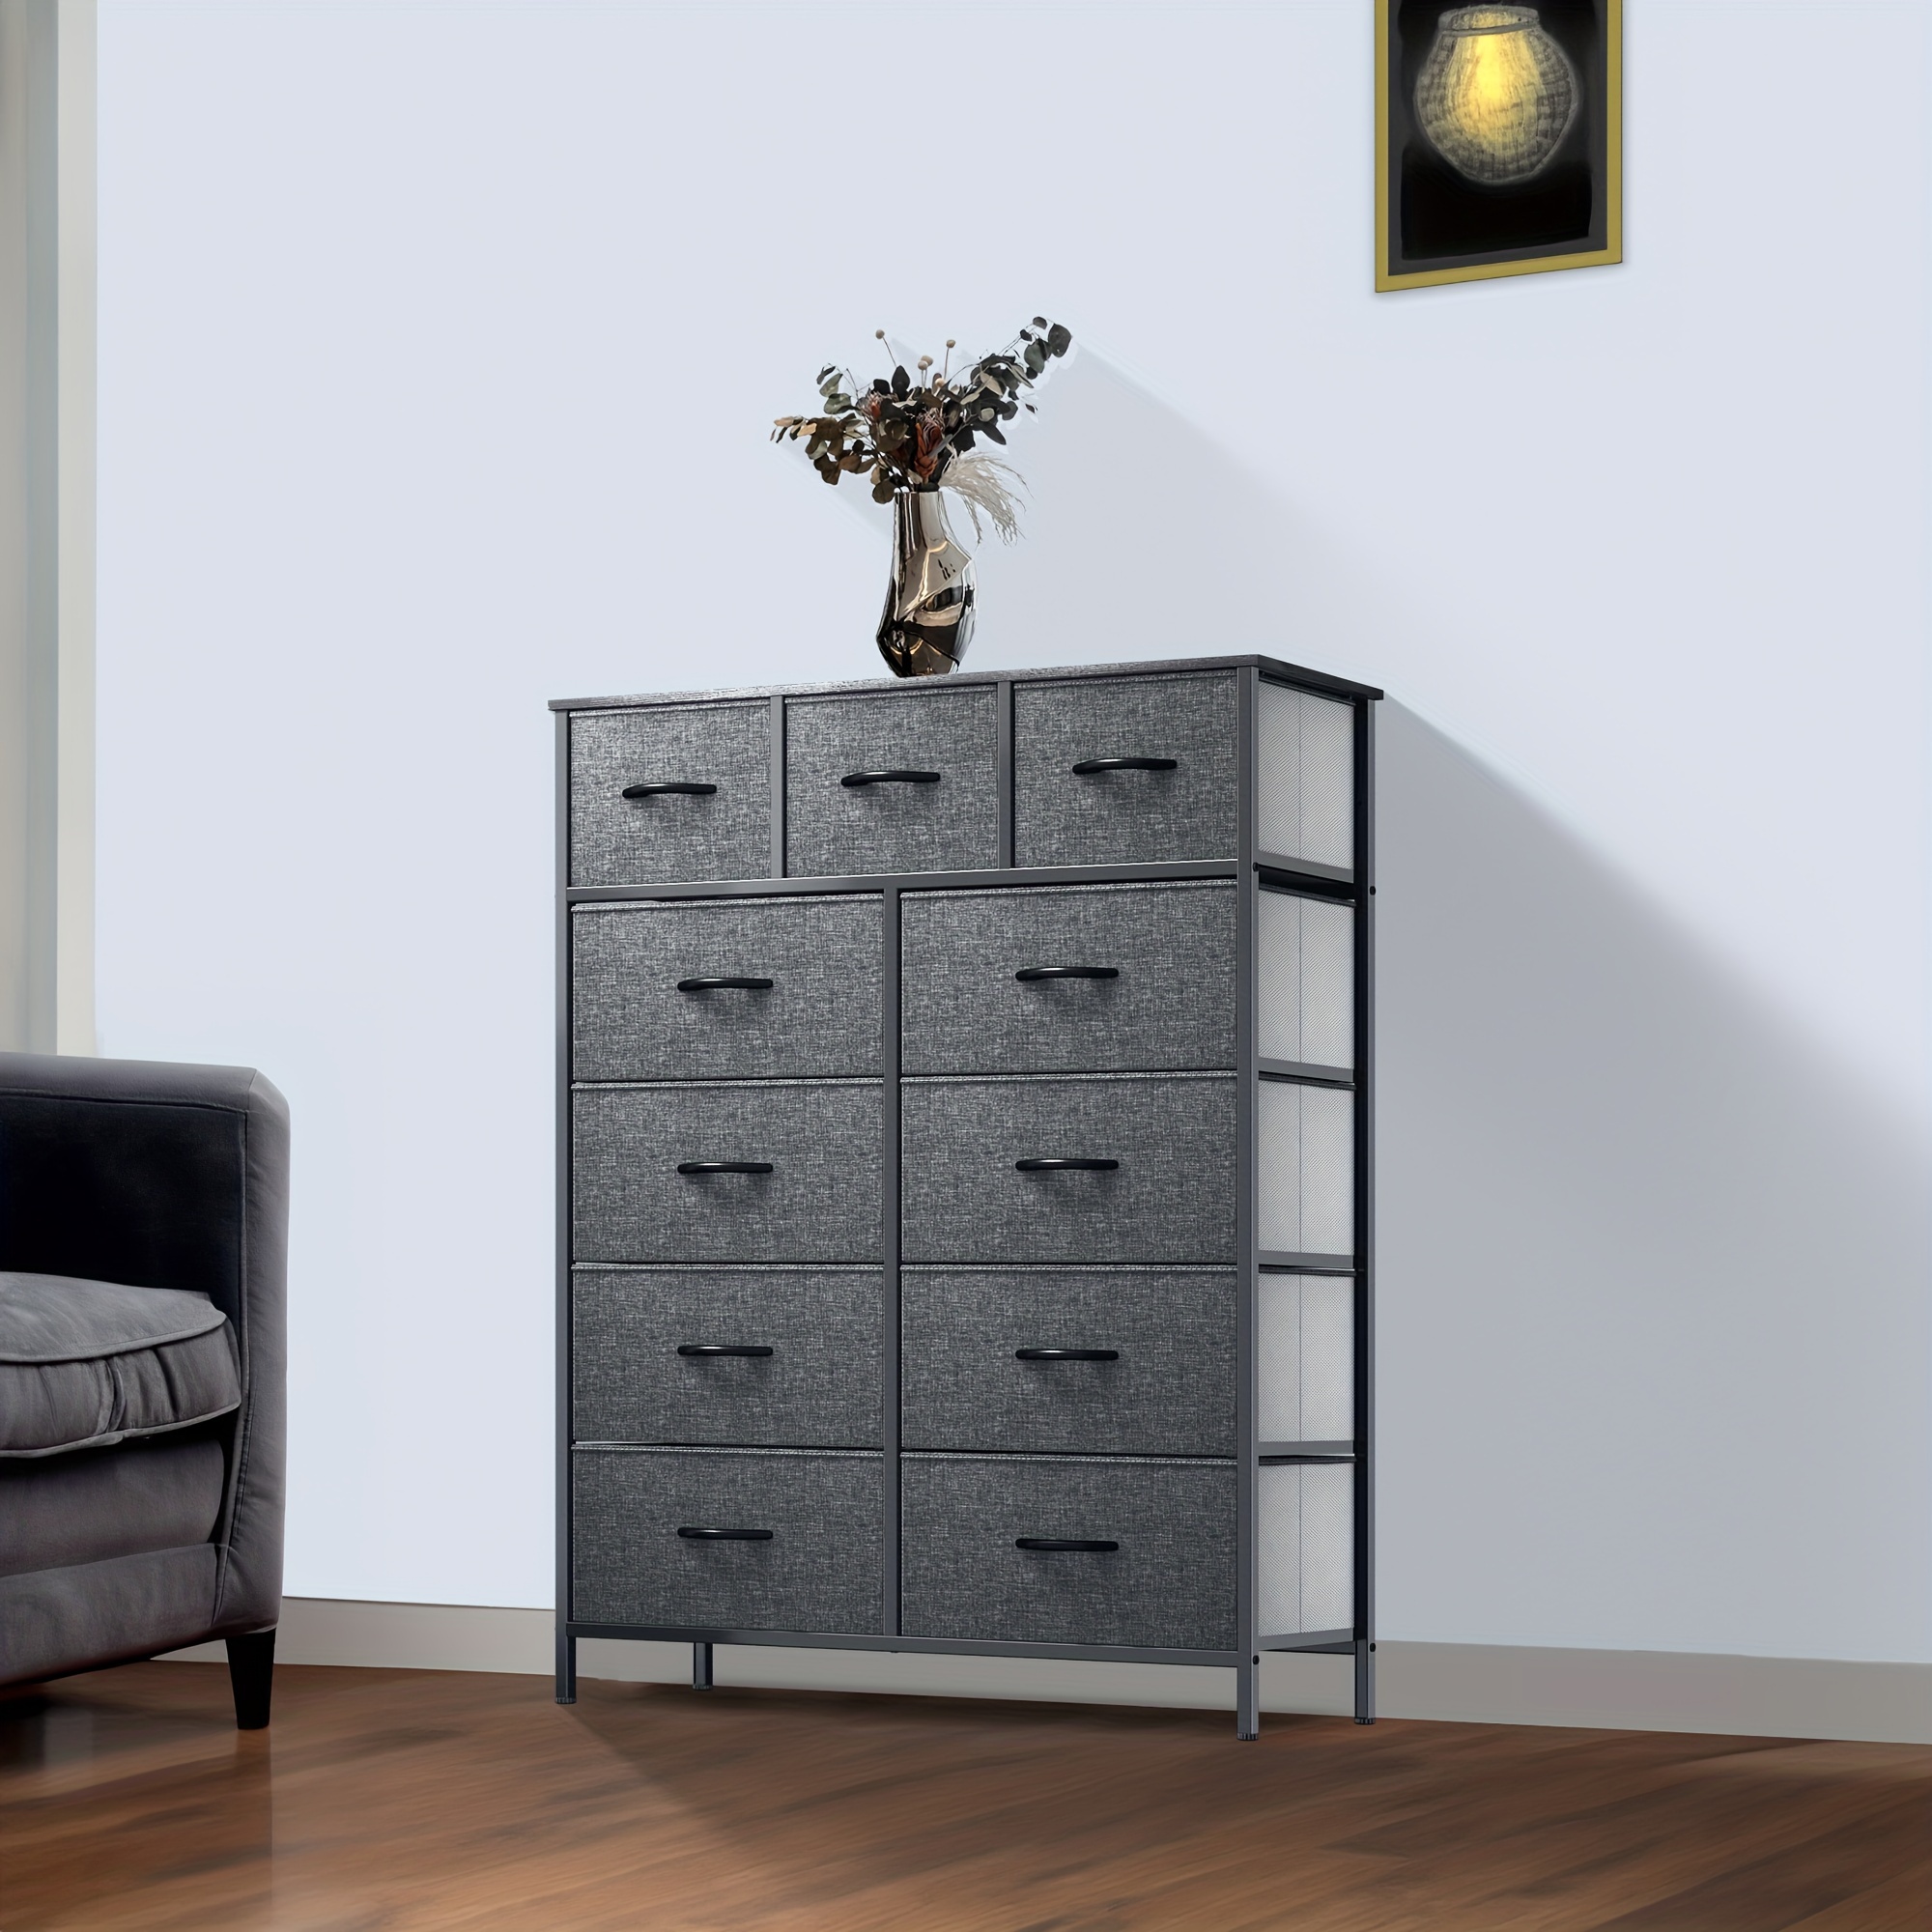 

Dwvo Fabric Dresser With 11 Drawers, Tall Dresser, Chest Of Drawer For Hallway, Sturdy Steel Frame, Wooden Top